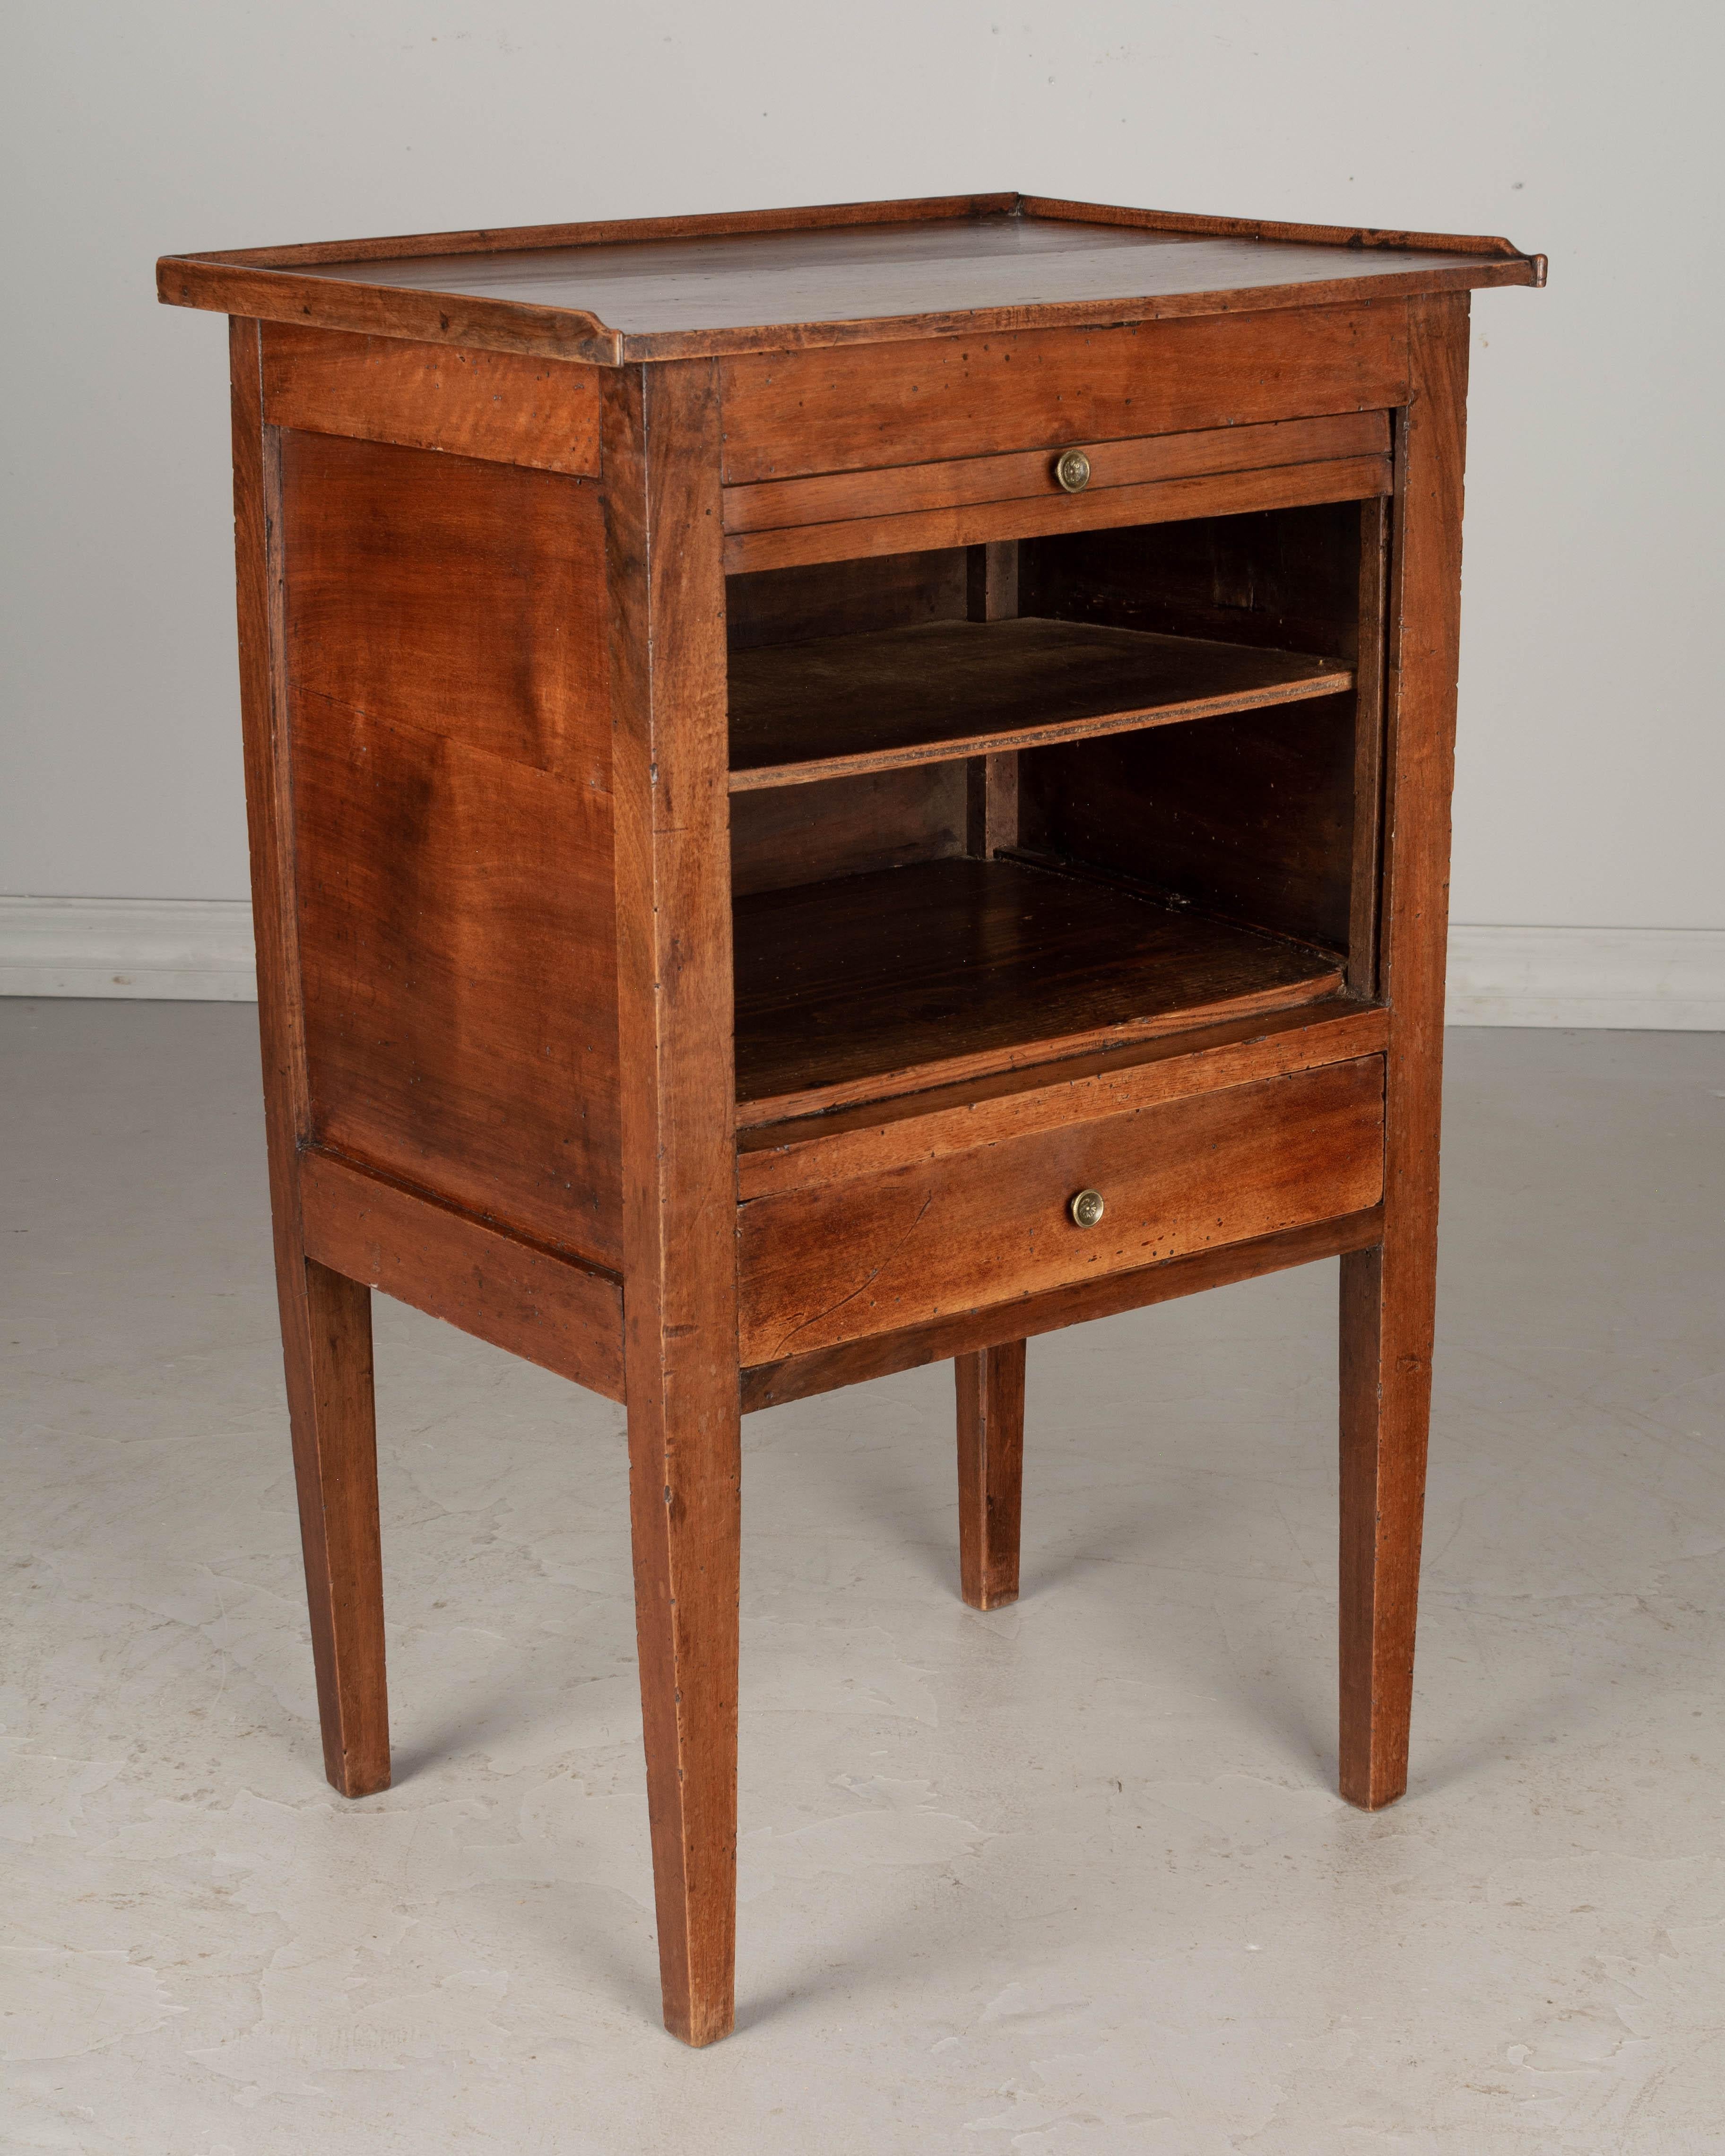 Hand-Crafted 19th Century French Country Side Table